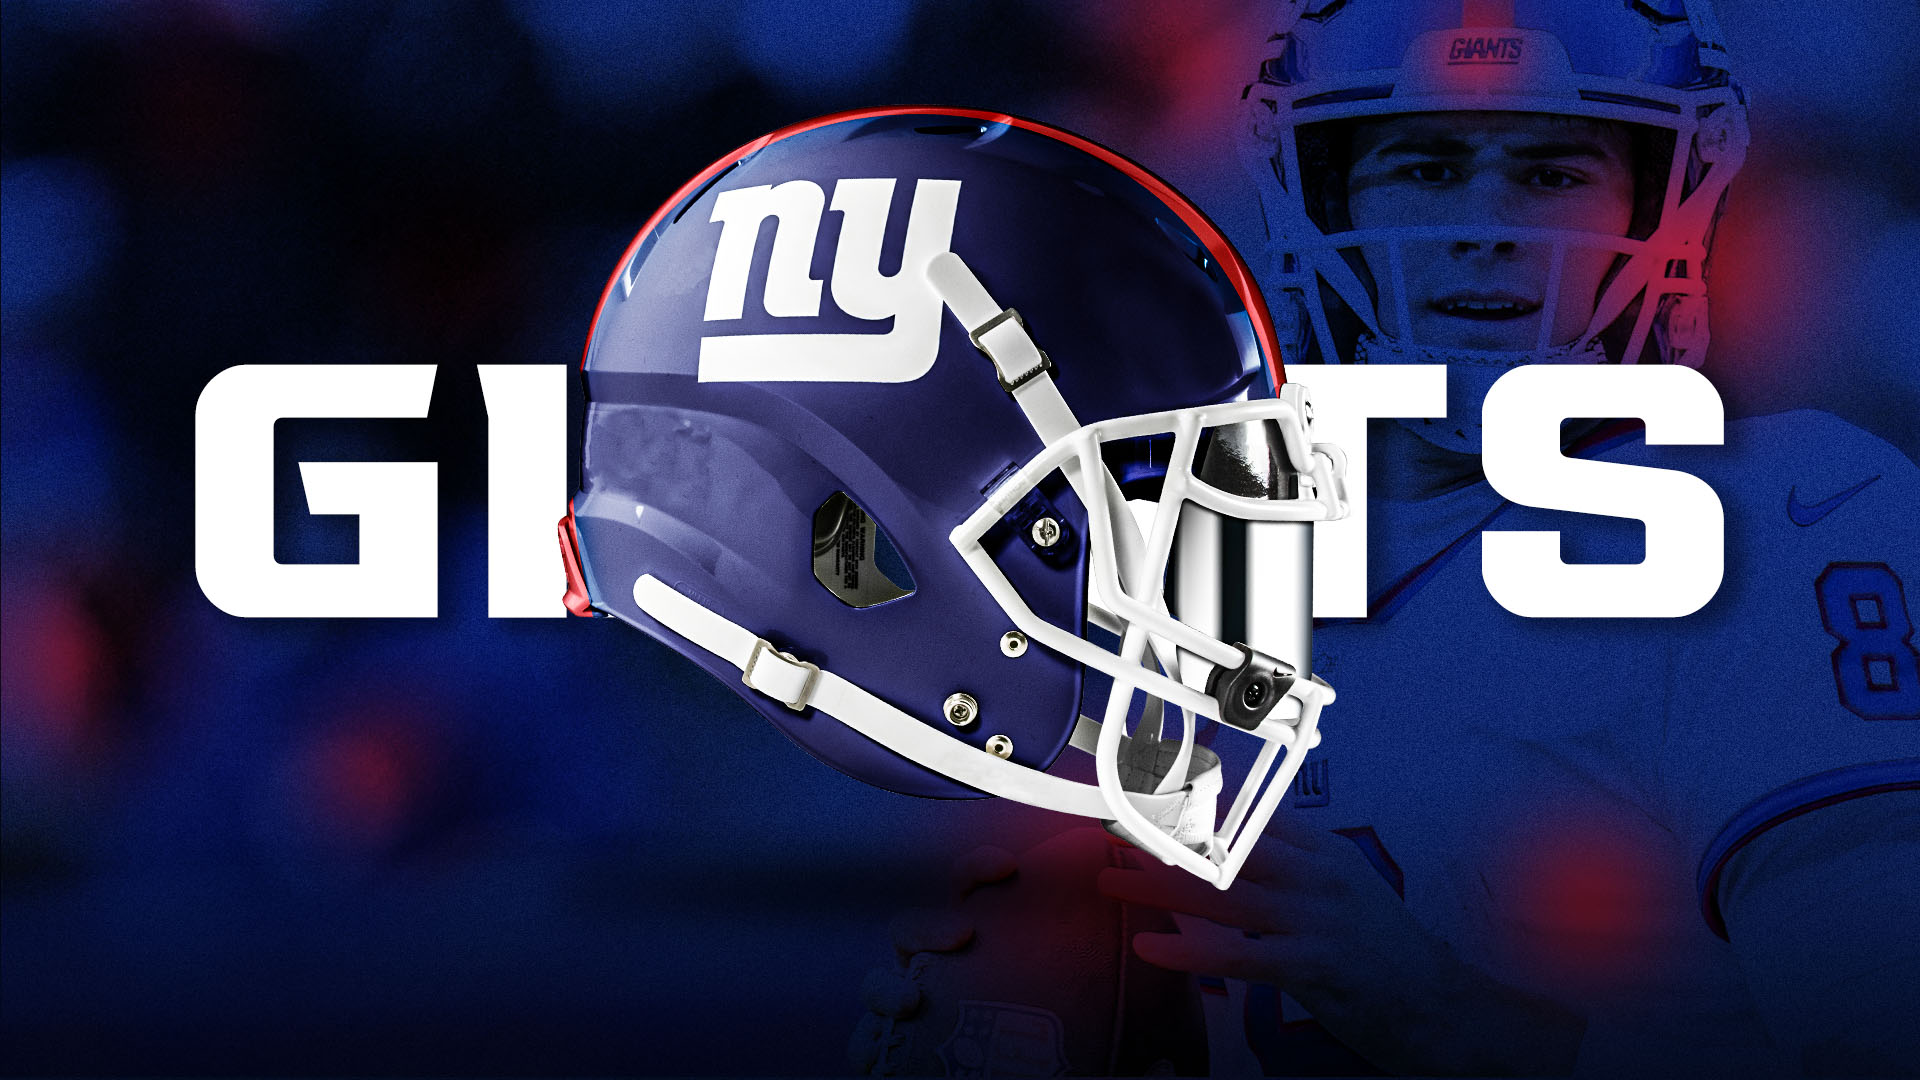 ny giants playing today